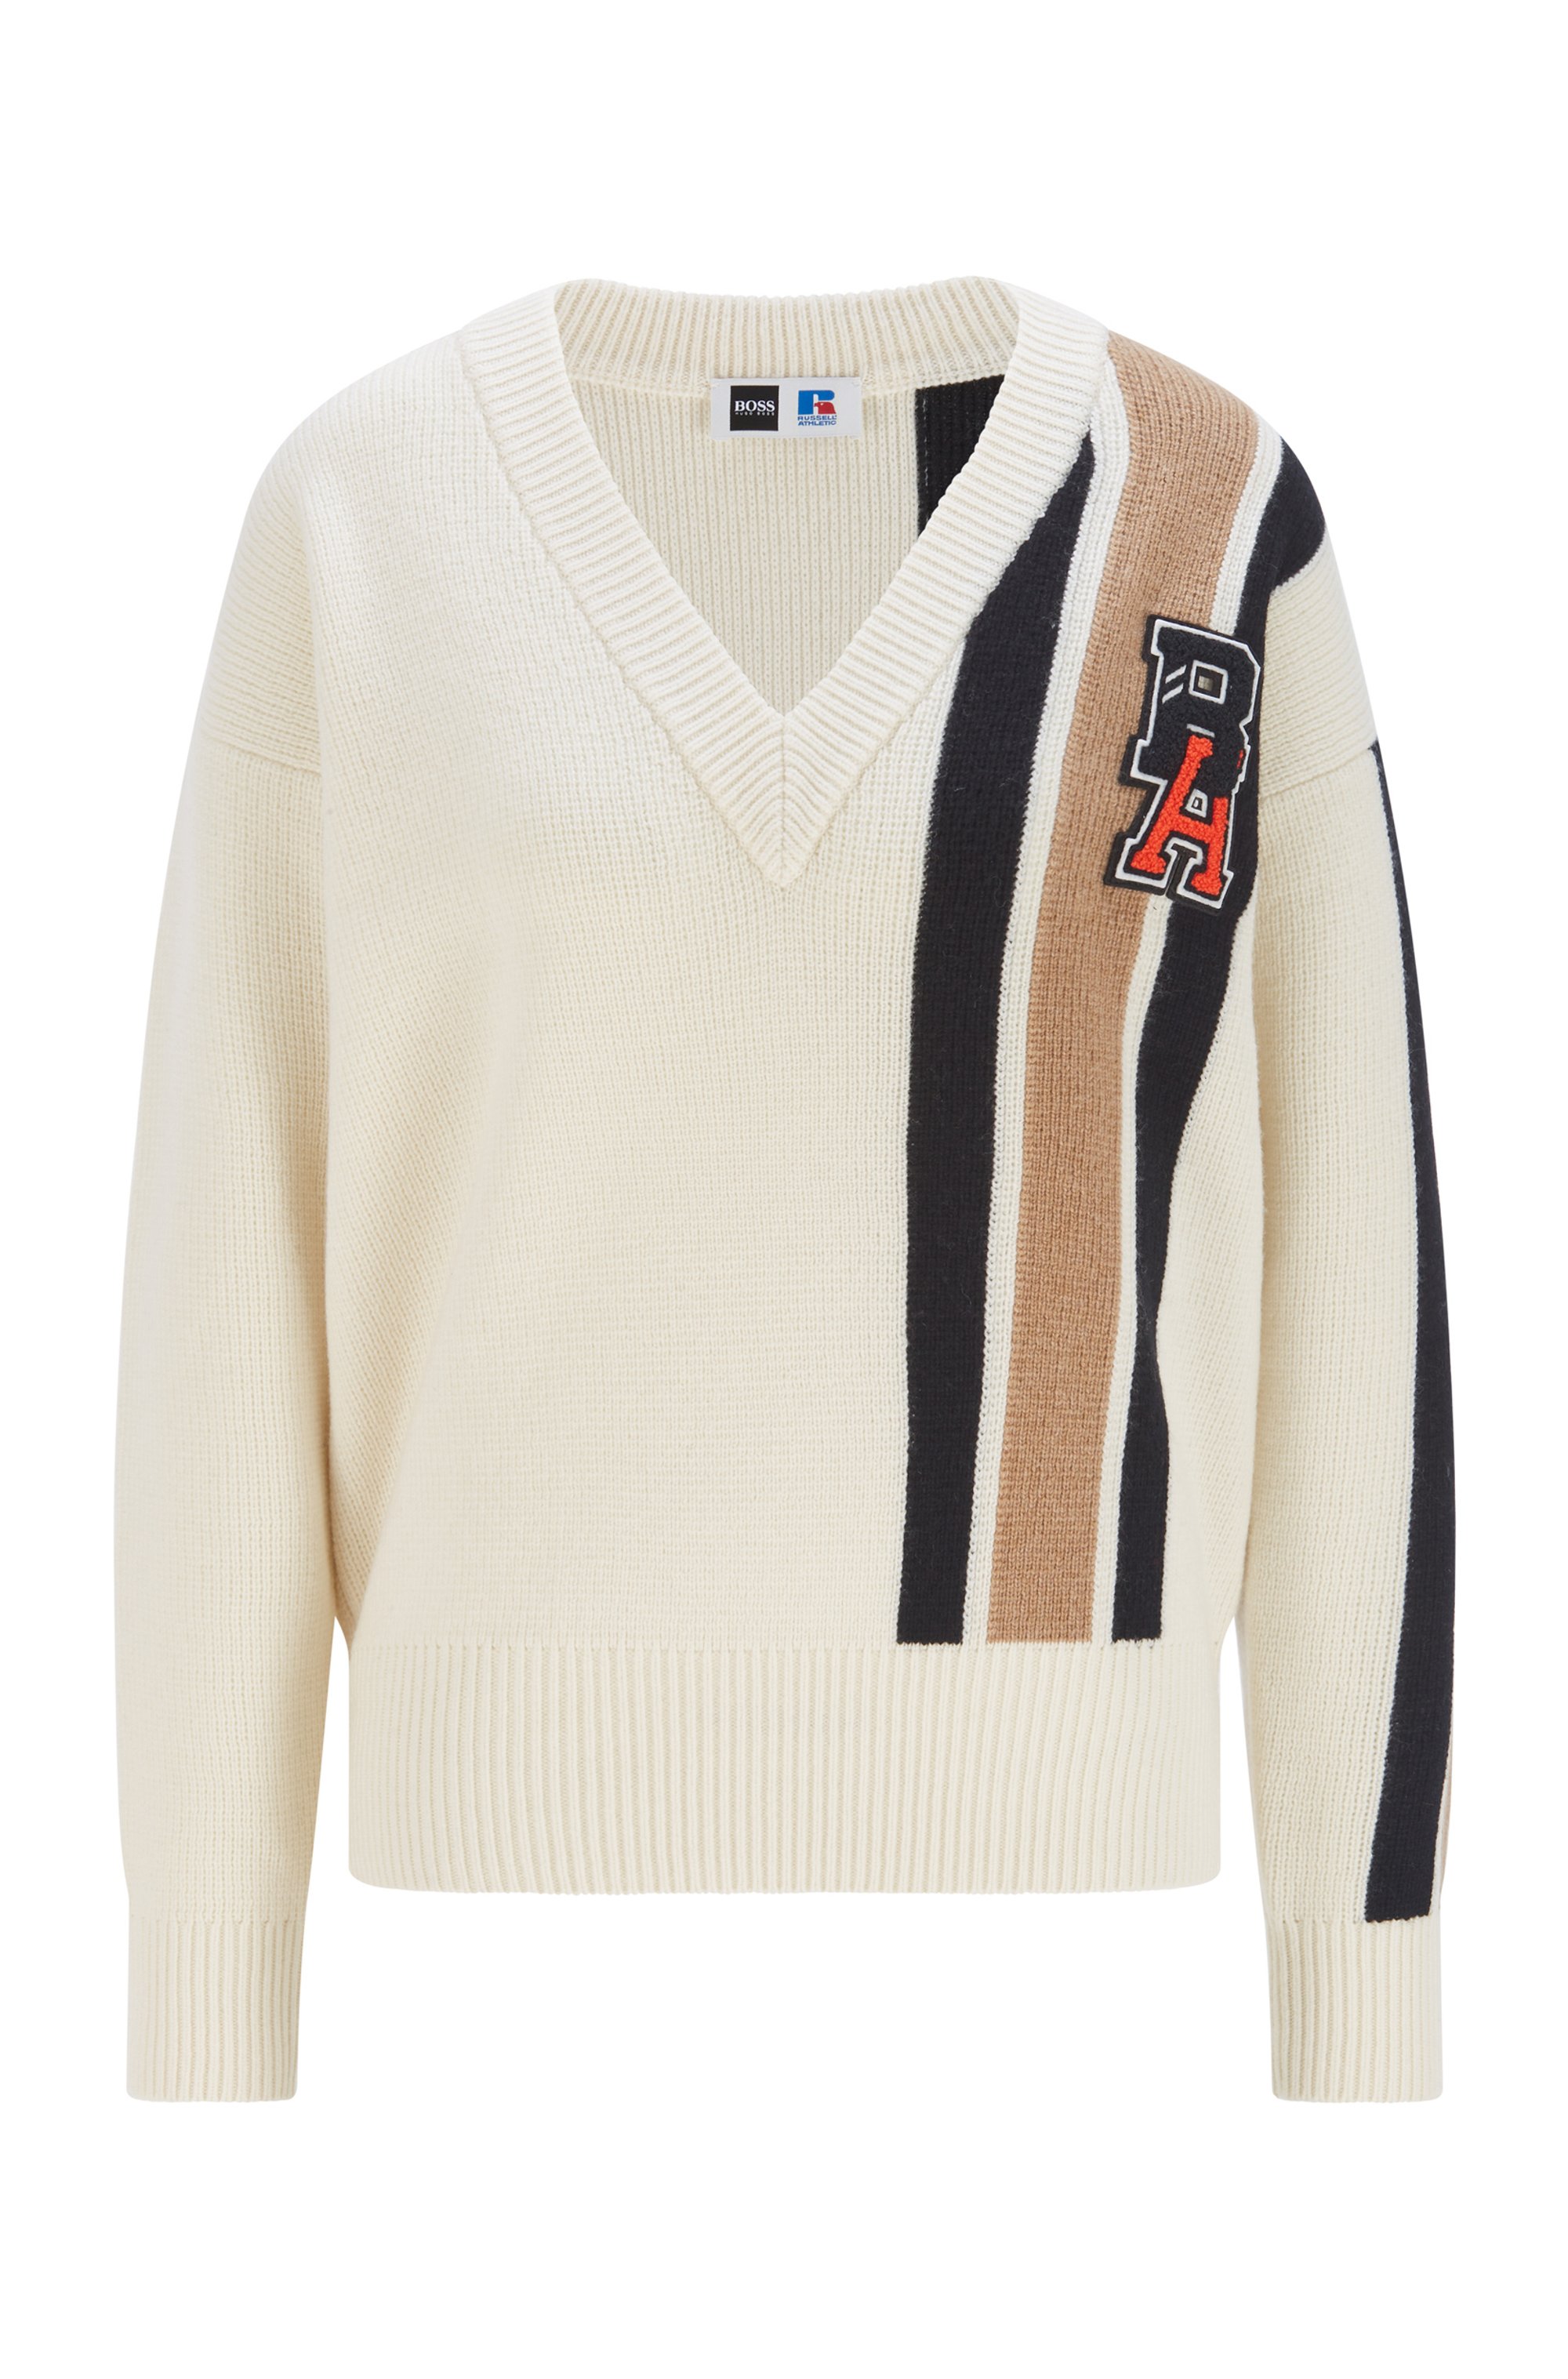 Wool-cashmere sweater with stripes and exclusive logo patch, White